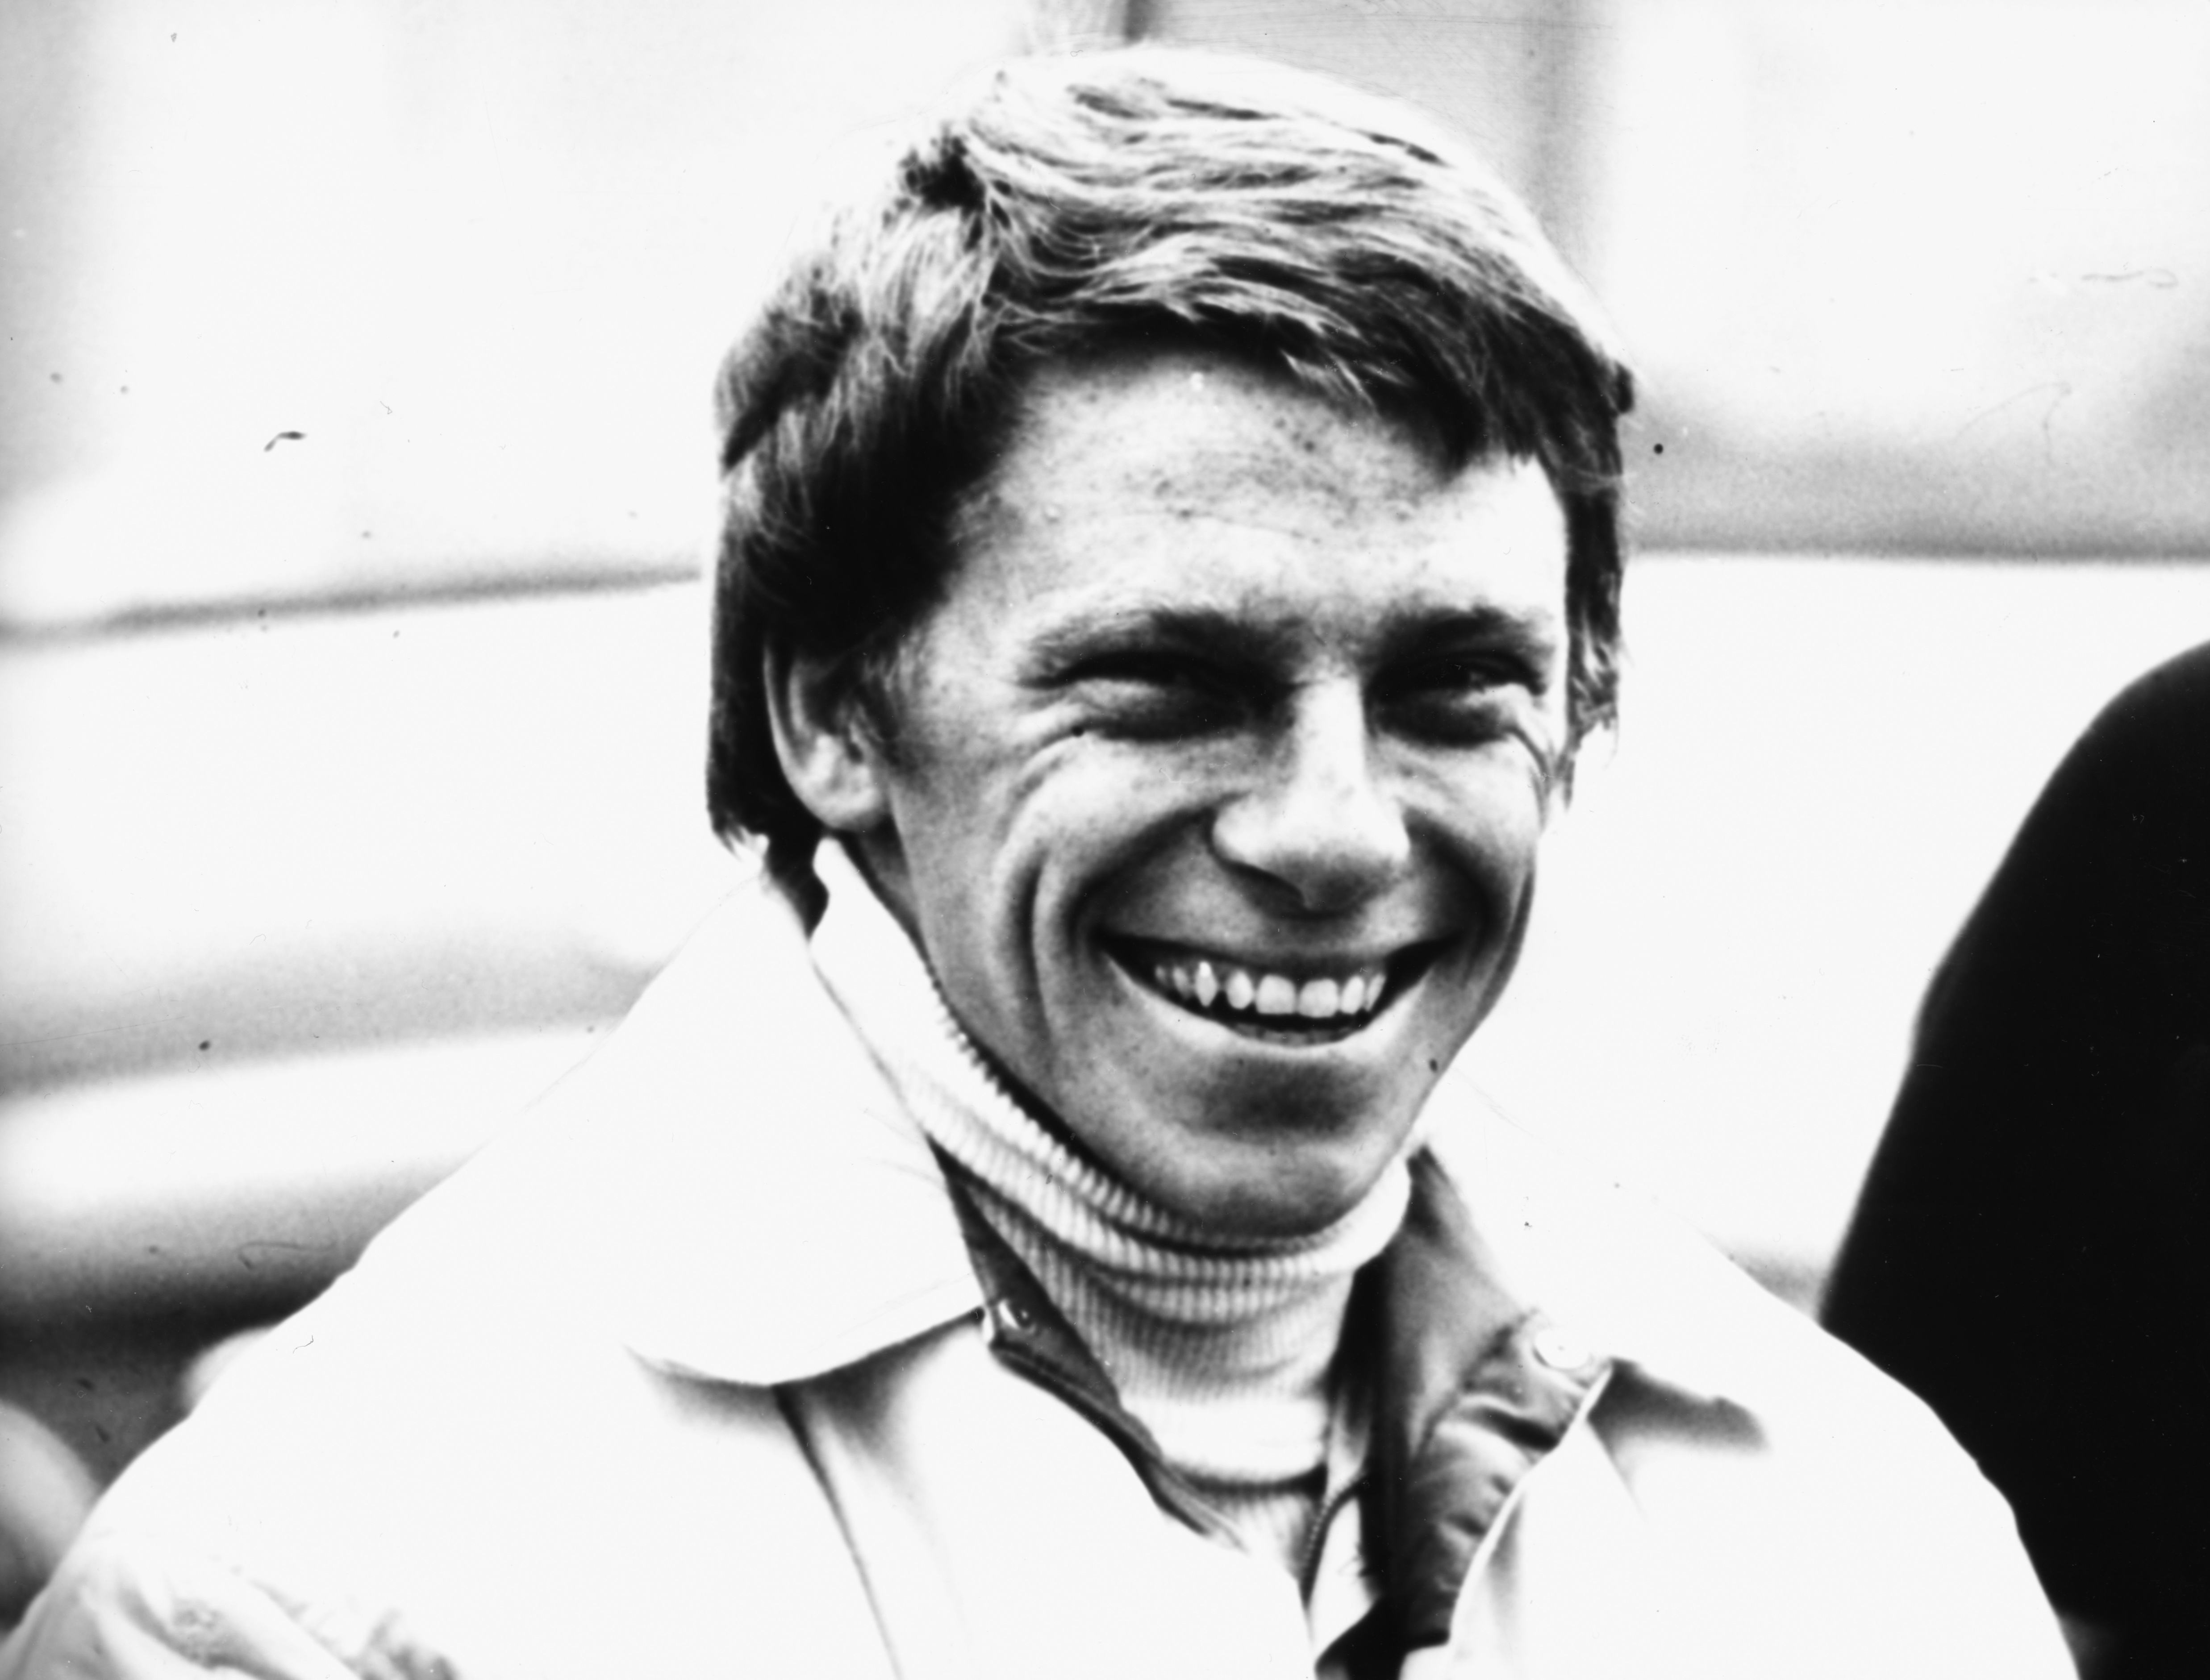 Driver Roger Williamson laughing, prior to his death at 25 years old